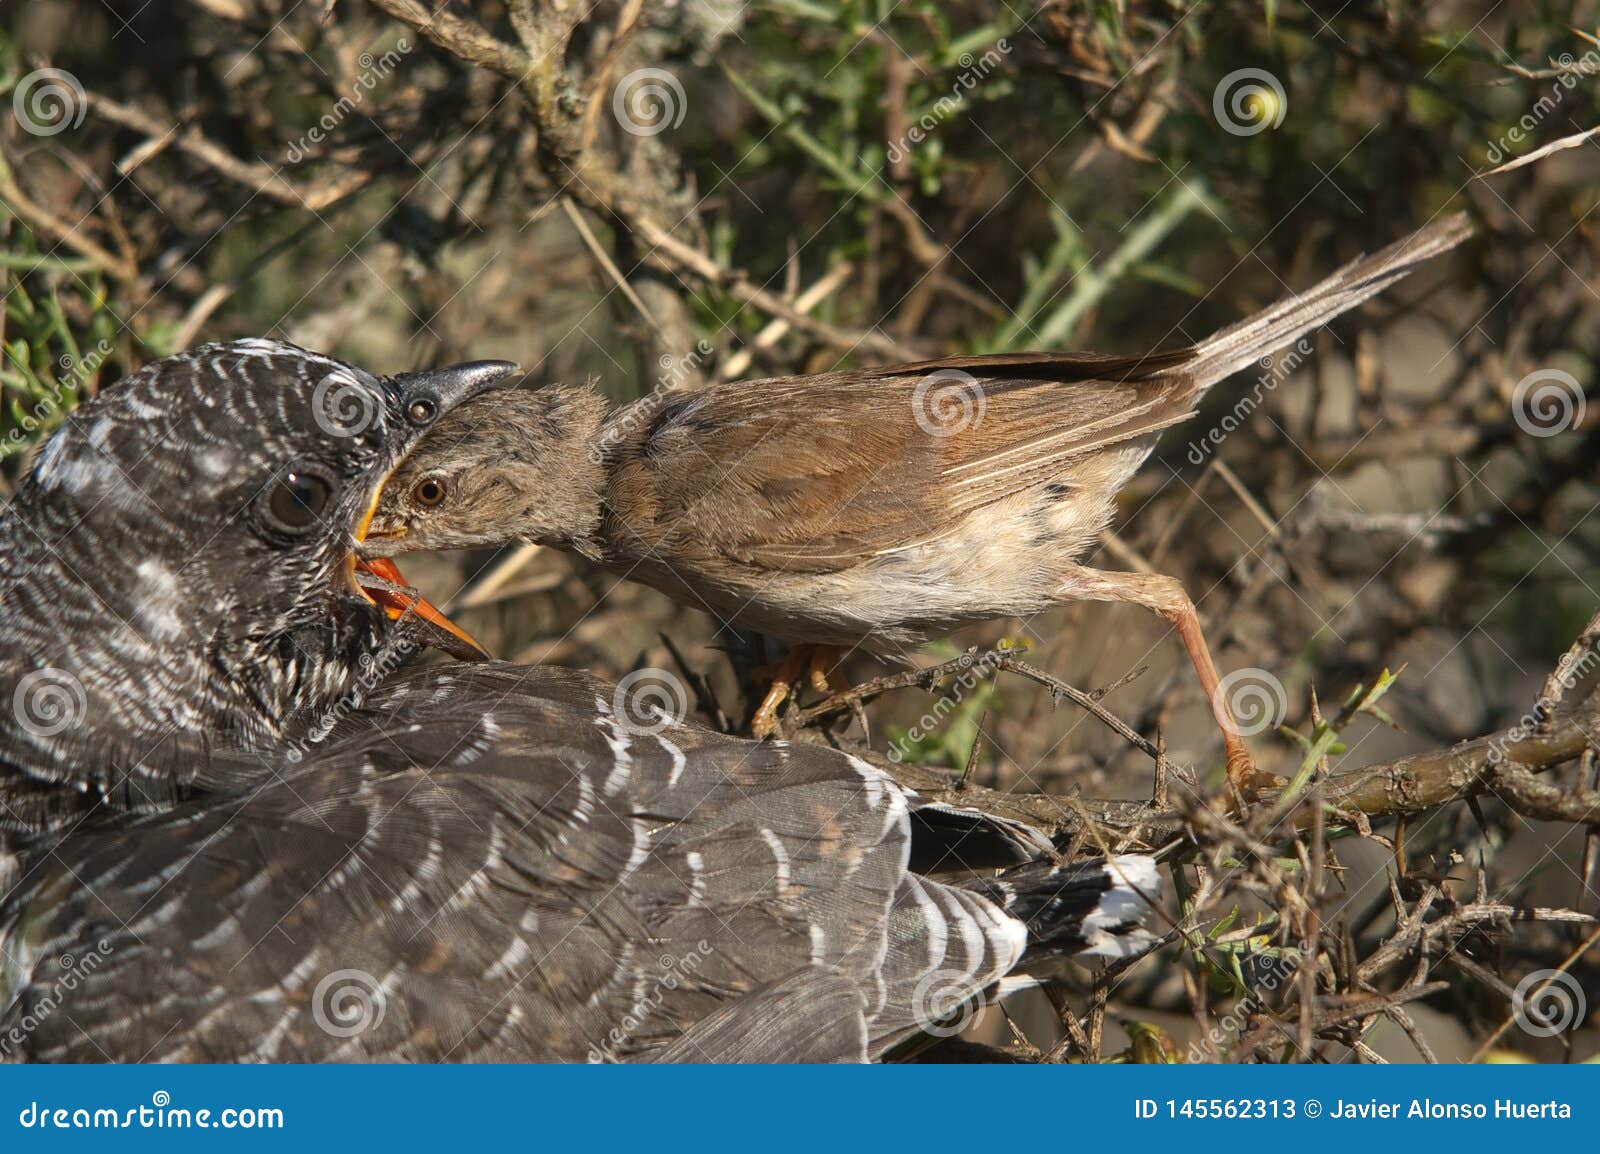 common cuckoo - cuculus canorus young in the nest- sylvia conspicillata - spectacled warbler